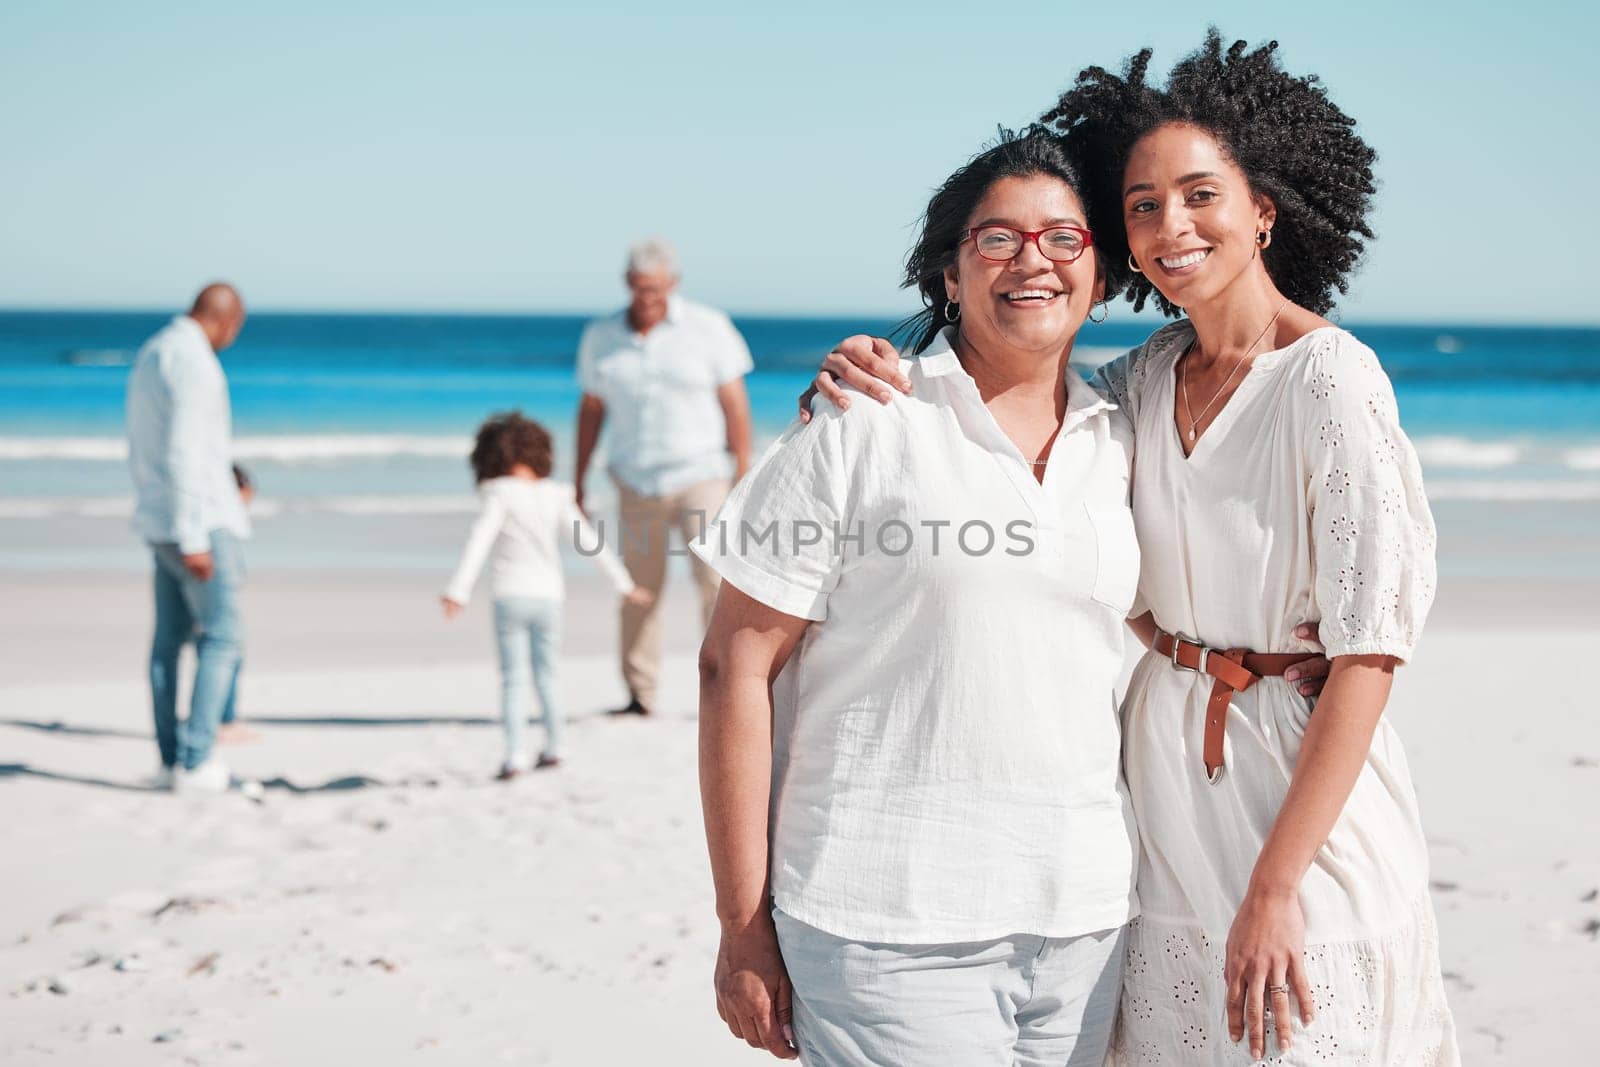 Portrait, summer with a mother and daughter on the beach during summer while their family play in the background. Love, smile or nature with a senior woman and adult child bonding outdoor together.